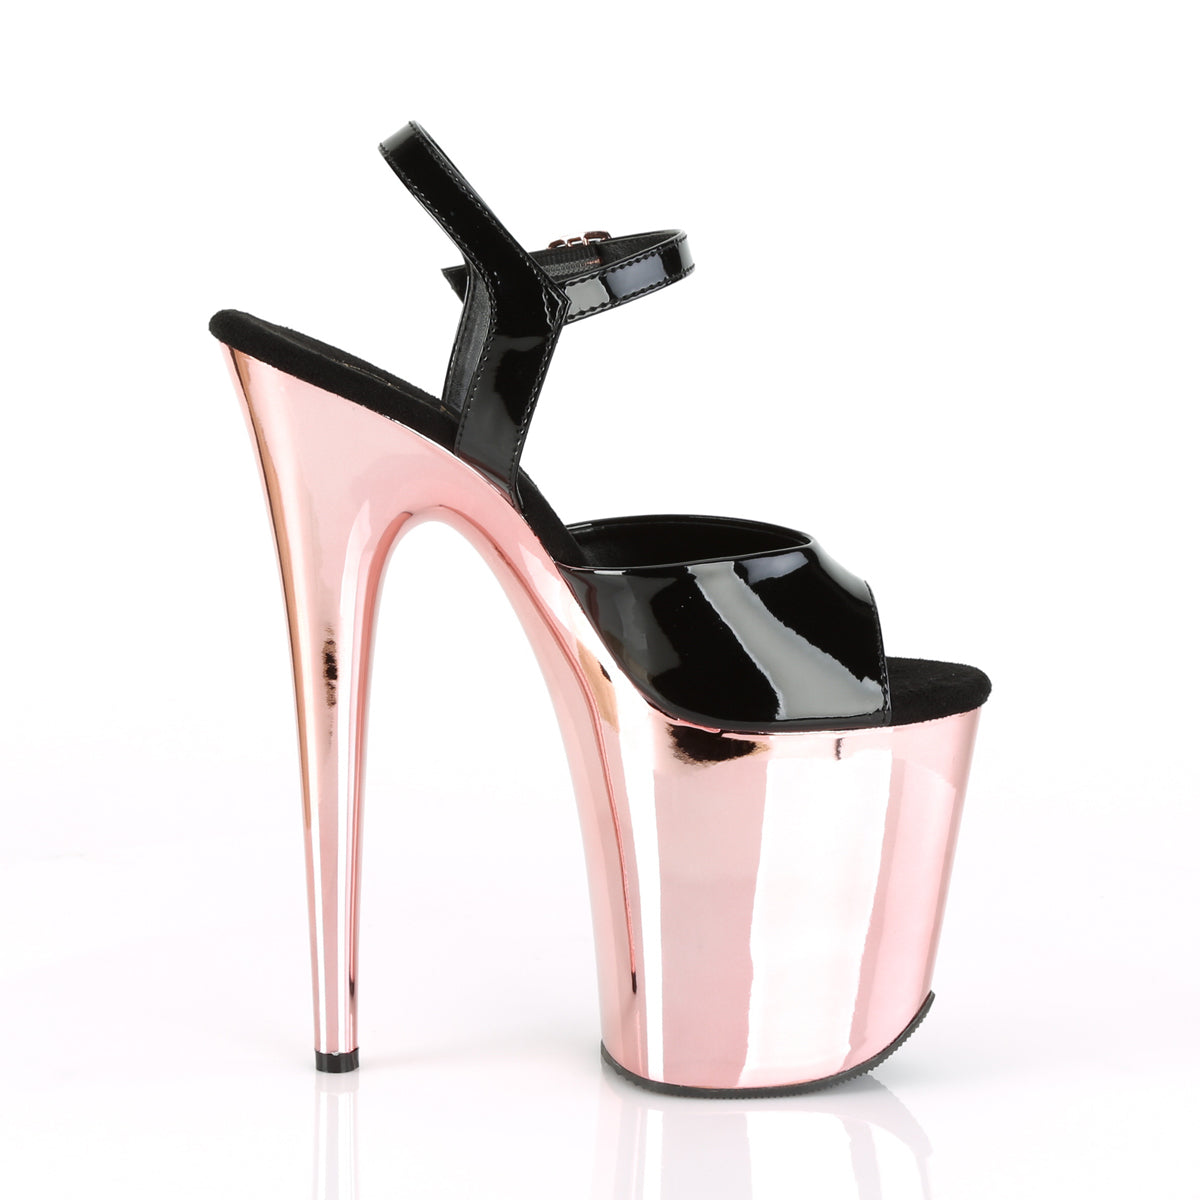 FLAMINGO-809 Pleaser 8" Heel Black Rose Gold Strippers Shoes-Pleaser- Sexy Shoes Fetish Heels